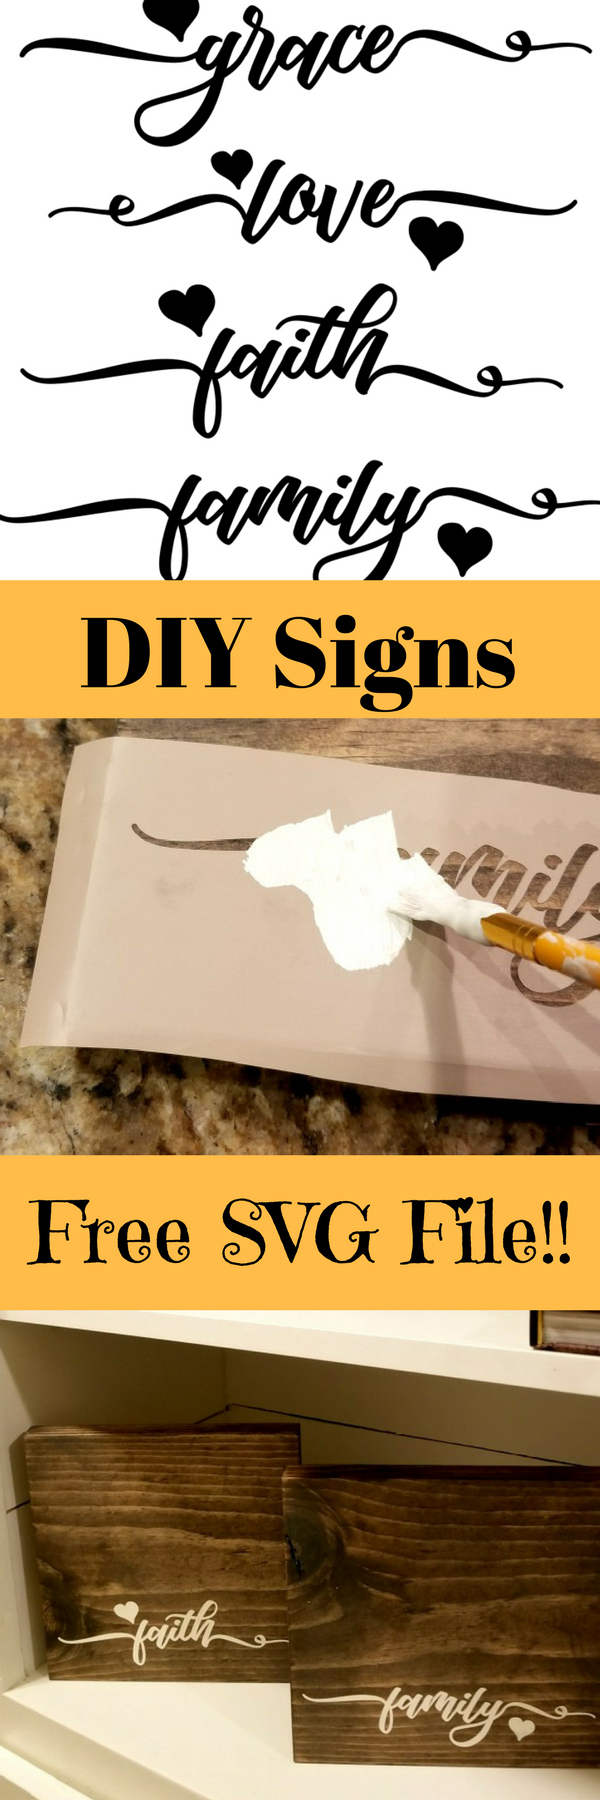 Diy Wooden Signs With Sayings Free, Wooden Signs With Sayings